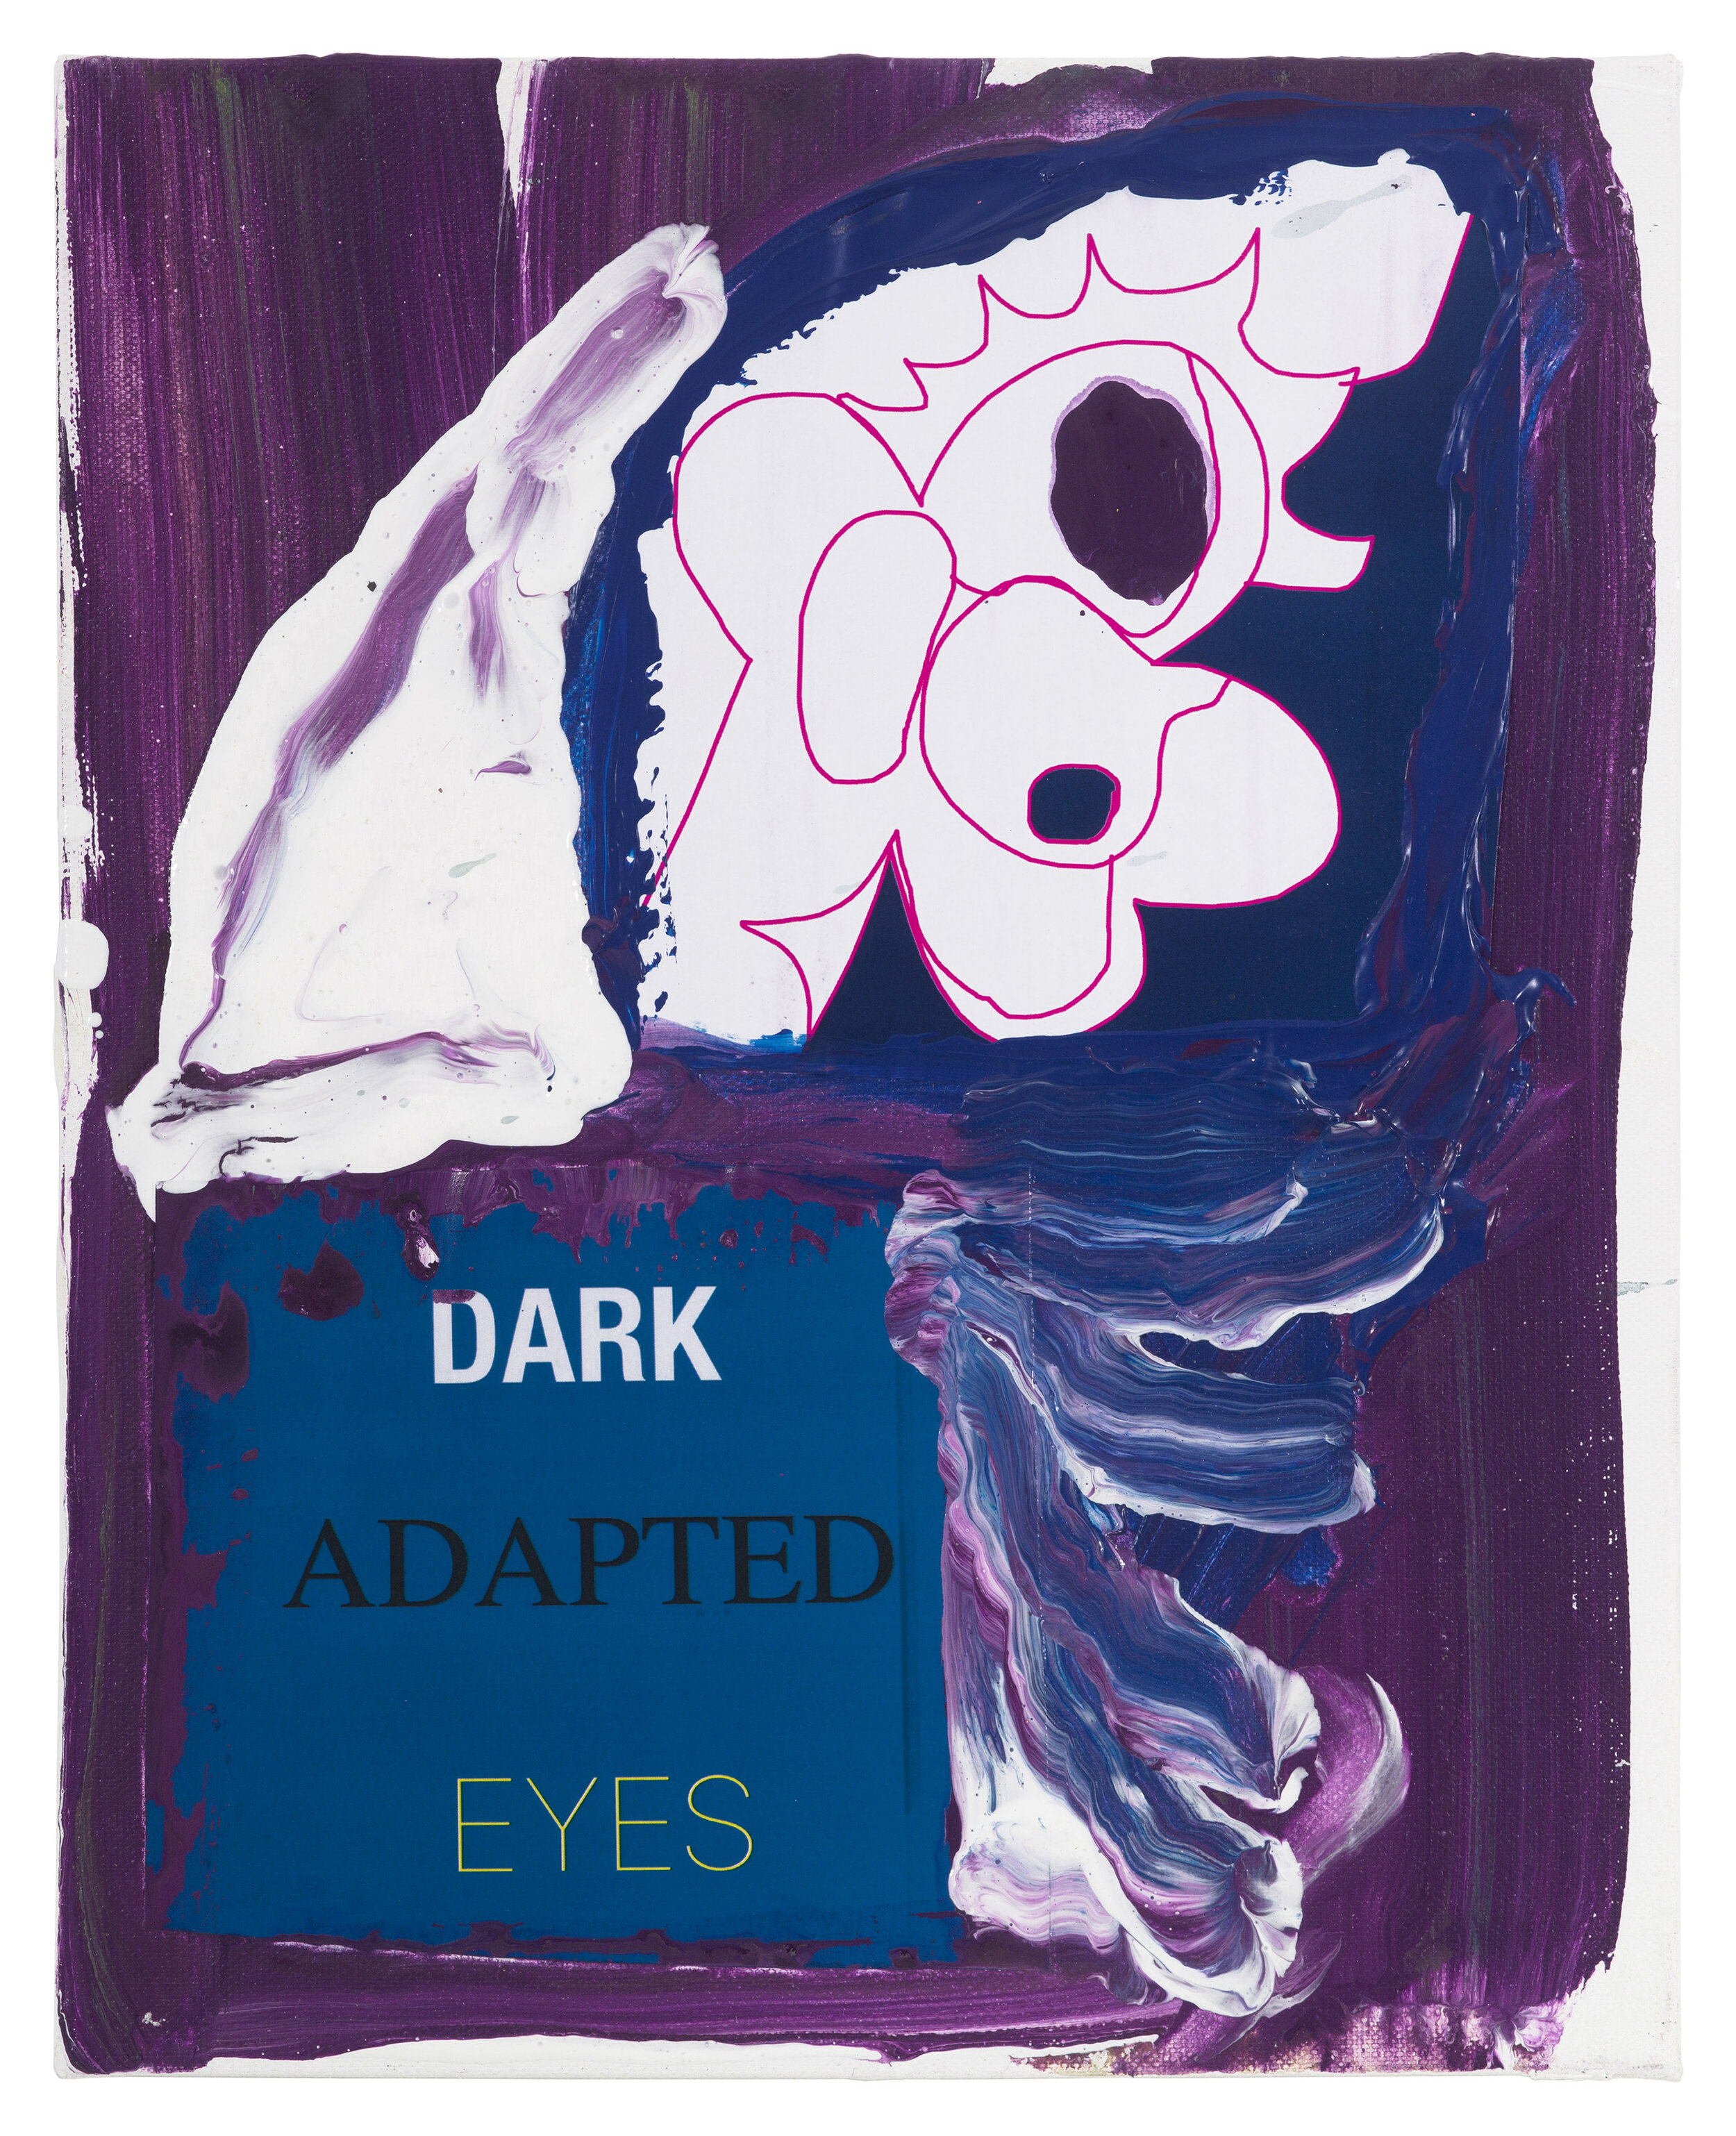  Drew Beattie and Ben Shepard  Dark Adapted Eyes   2019 acrylic and collage on canvas 14 x 11 inches 